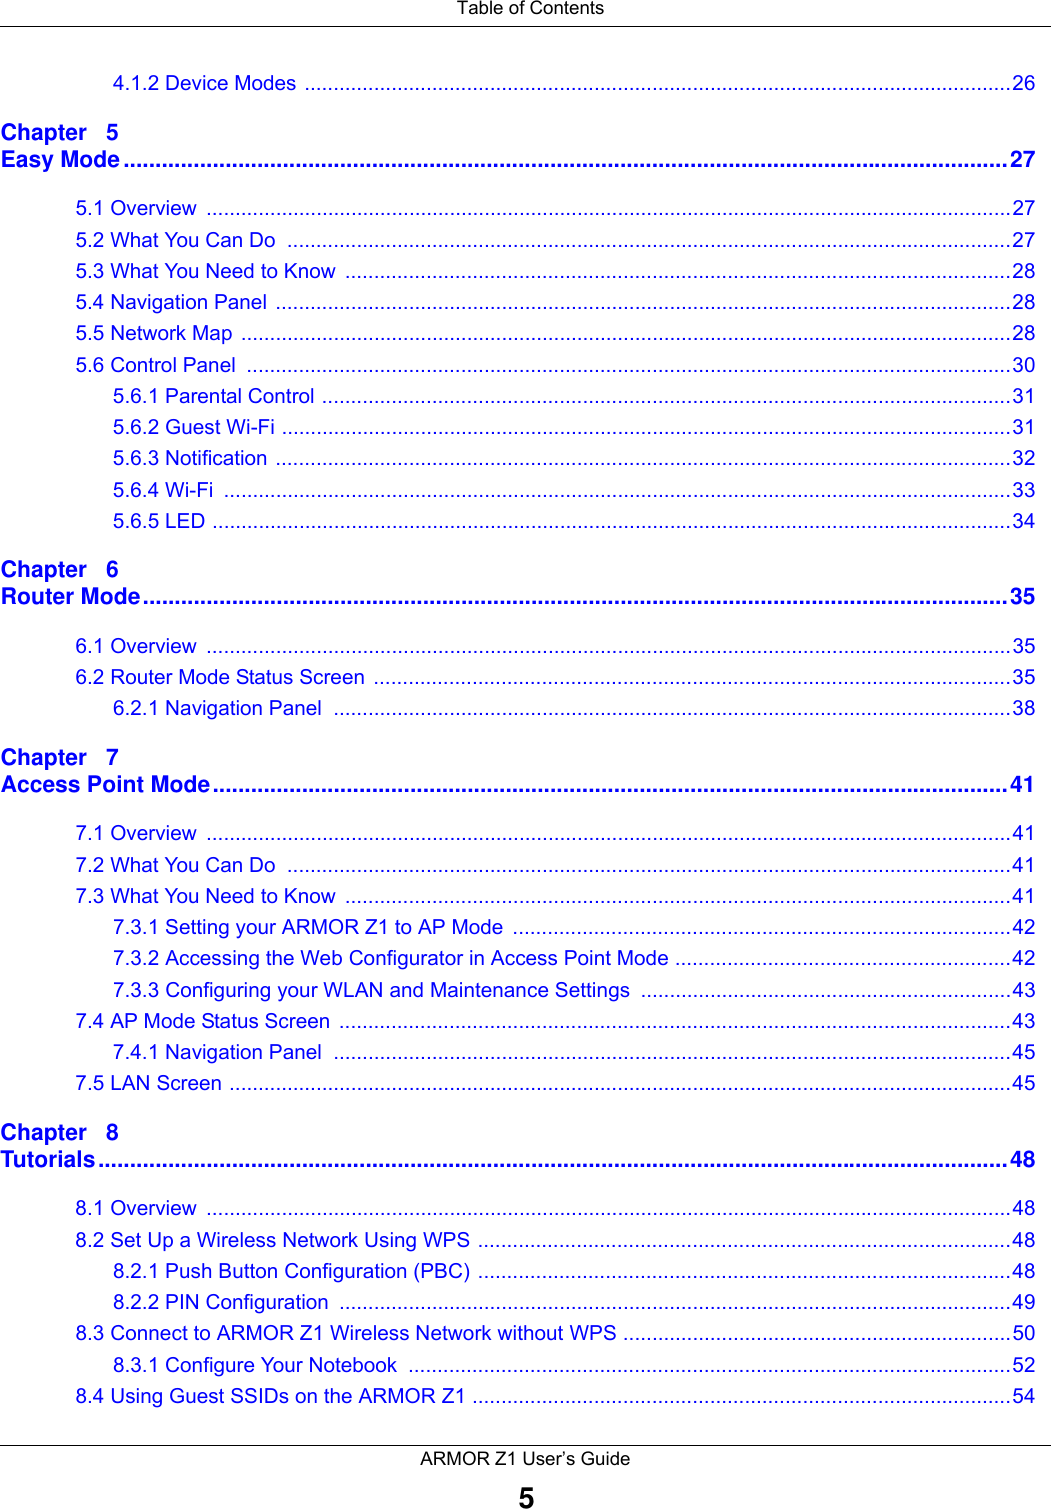  Table of ContentsARMOR Z1 User’s Guide54.1.2 Device Modes ..........................................................................................................................26Chapter   5Easy Mode...........................................................................................................................................275.1 Overview  ...........................................................................................................................................275.2 What You Can Do  .............................................................................................................................275.3 What You Need to Know  ...................................................................................................................285.4 Navigation Panel ...............................................................................................................................285.5 Network Map  .....................................................................................................................................285.6 Control Panel  ....................................................................................................................................305.6.1 Parental Control .......................................................................................................................315.6.2 Guest Wi-Fi ..............................................................................................................................315.6.3 Notification ...............................................................................................................................325.6.4 Wi-Fi  ........................................................................................................................................335.6.5 LED ..........................................................................................................................................34Chapter   6Router Mode........................................................................................................................................356.1 Overview  ...........................................................................................................................................356.2 Router Mode Status Screen  ..............................................................................................................356.2.1 Navigation Panel  .....................................................................................................................38Chapter   7Access Point Mode.............................................................................................................................417.1 Overview  ...........................................................................................................................................417.2 What You Can Do  .............................................................................................................................417.3 What You Need to Know  ...................................................................................................................417.3.1 Setting your ARMOR Z1 to AP Mode  ......................................................................................427.3.2 Accessing the Web Configurator in Access Point Mode ..........................................................427.3.3 Configuring your WLAN and Maintenance Settings ................................................................437.4 AP Mode Status Screen  ....................................................................................................................437.4.1 Navigation Panel  .....................................................................................................................457.5 LAN Screen .......................................................................................................................................45Chapter   8Tutorials...............................................................................................................................................488.1 Overview  ...........................................................................................................................................488.2 Set Up a Wireless Network Using WPS ............................................................................................488.2.1 Push Button Configuration (PBC) ............................................................................................488.2.2 PIN Configuration  ....................................................................................................................498.3 Connect to ARMOR Z1 Wireless Network without WPS ...................................................................508.3.1 Configure Your Notebook  ........................................................................................................528.4 Using Guest SSIDs on the ARMOR Z1 .............................................................................................54